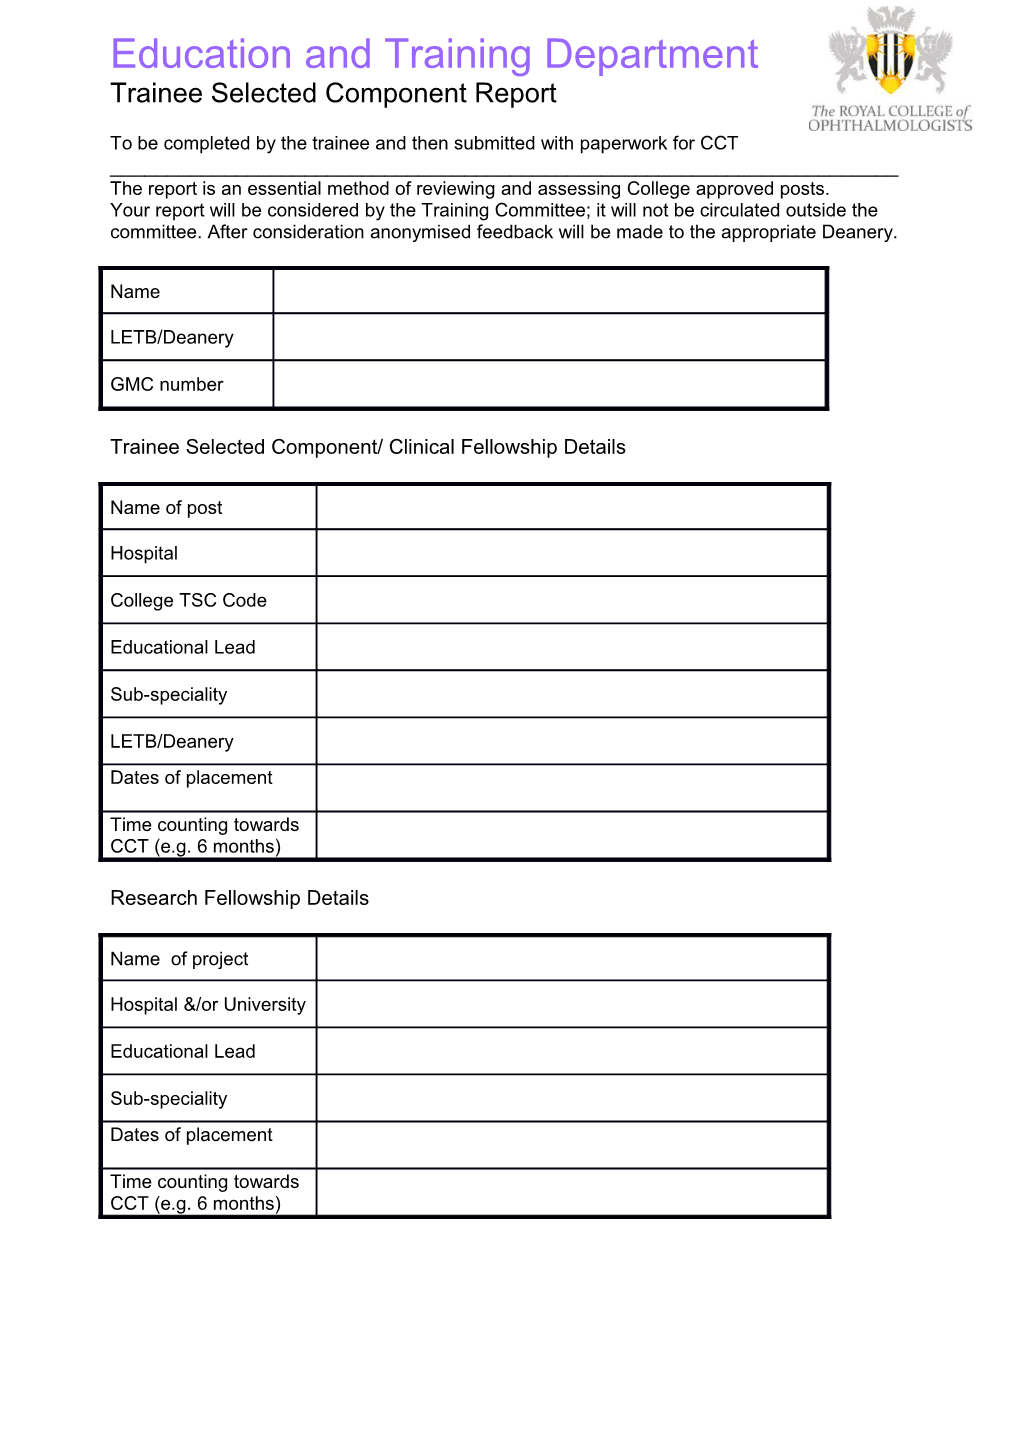 Educational Supervisor S Structured Report: Submission to the Annual Review Of